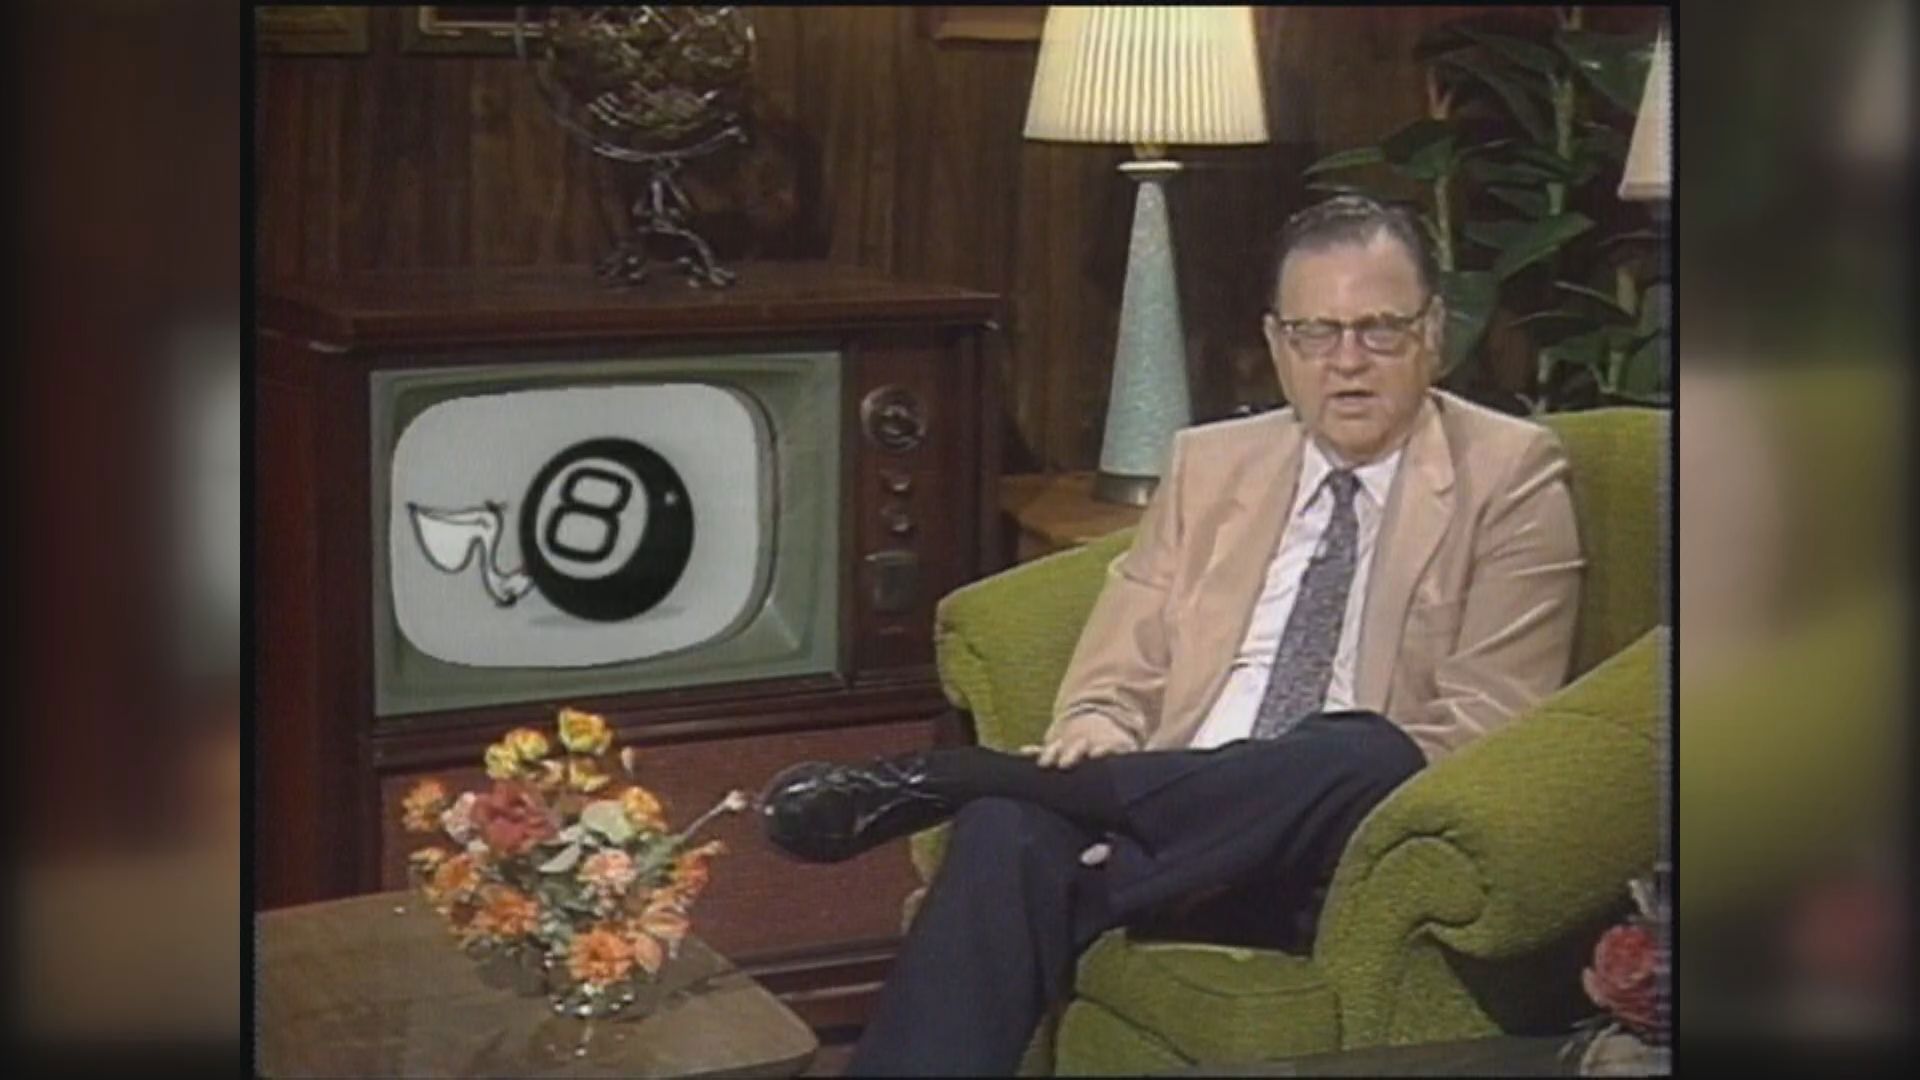 KFMB-TV legendary anchorman Ray Wilson gives a history lesson about our station in 1989.